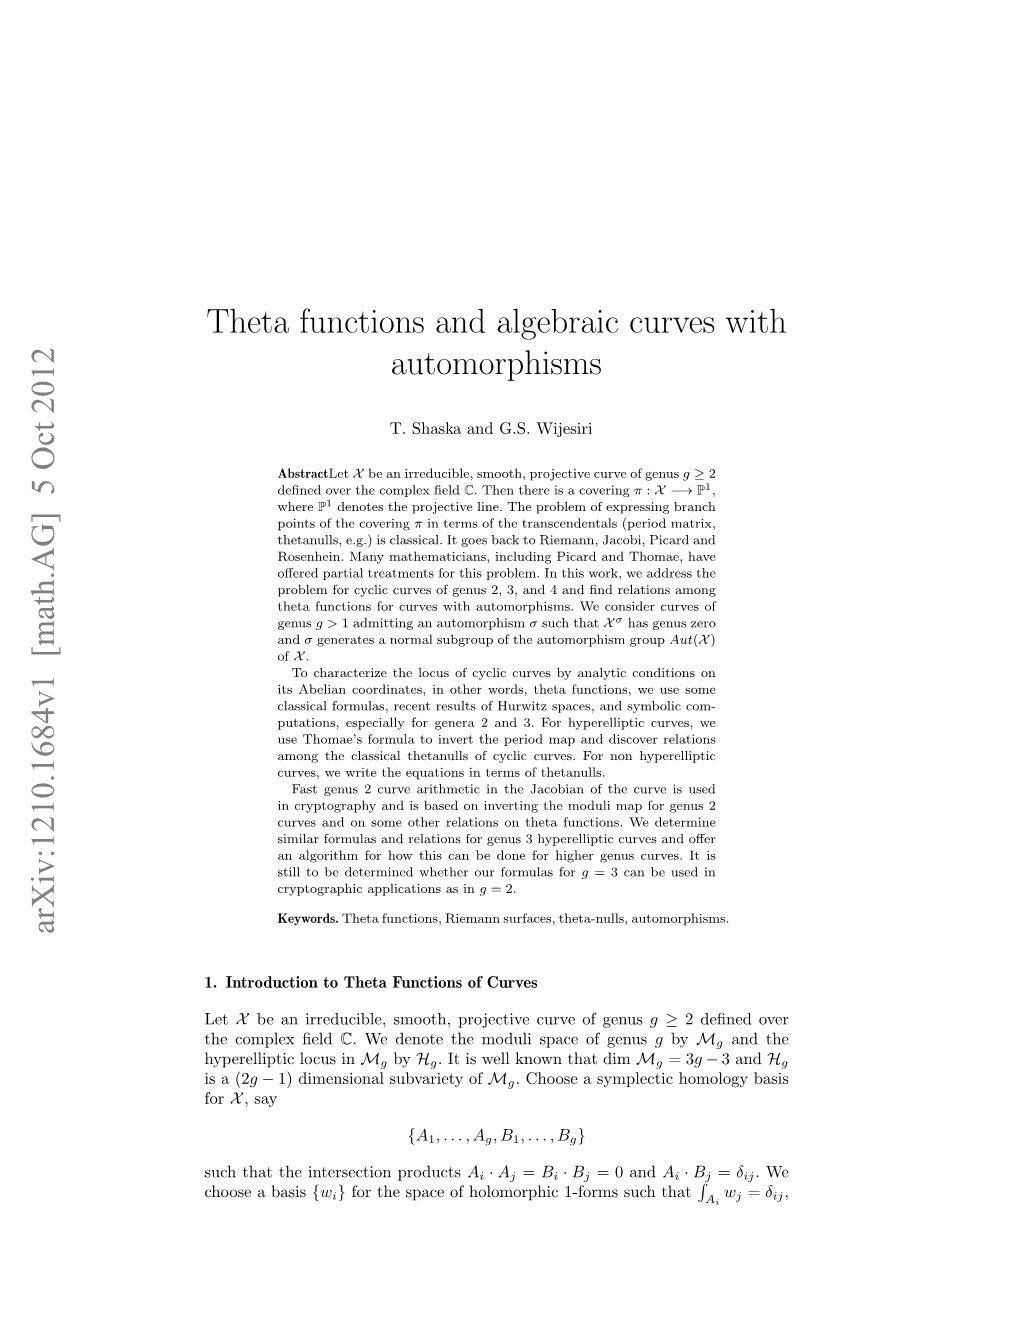 Theta Functions and Algebraic Curves with Automorphisms